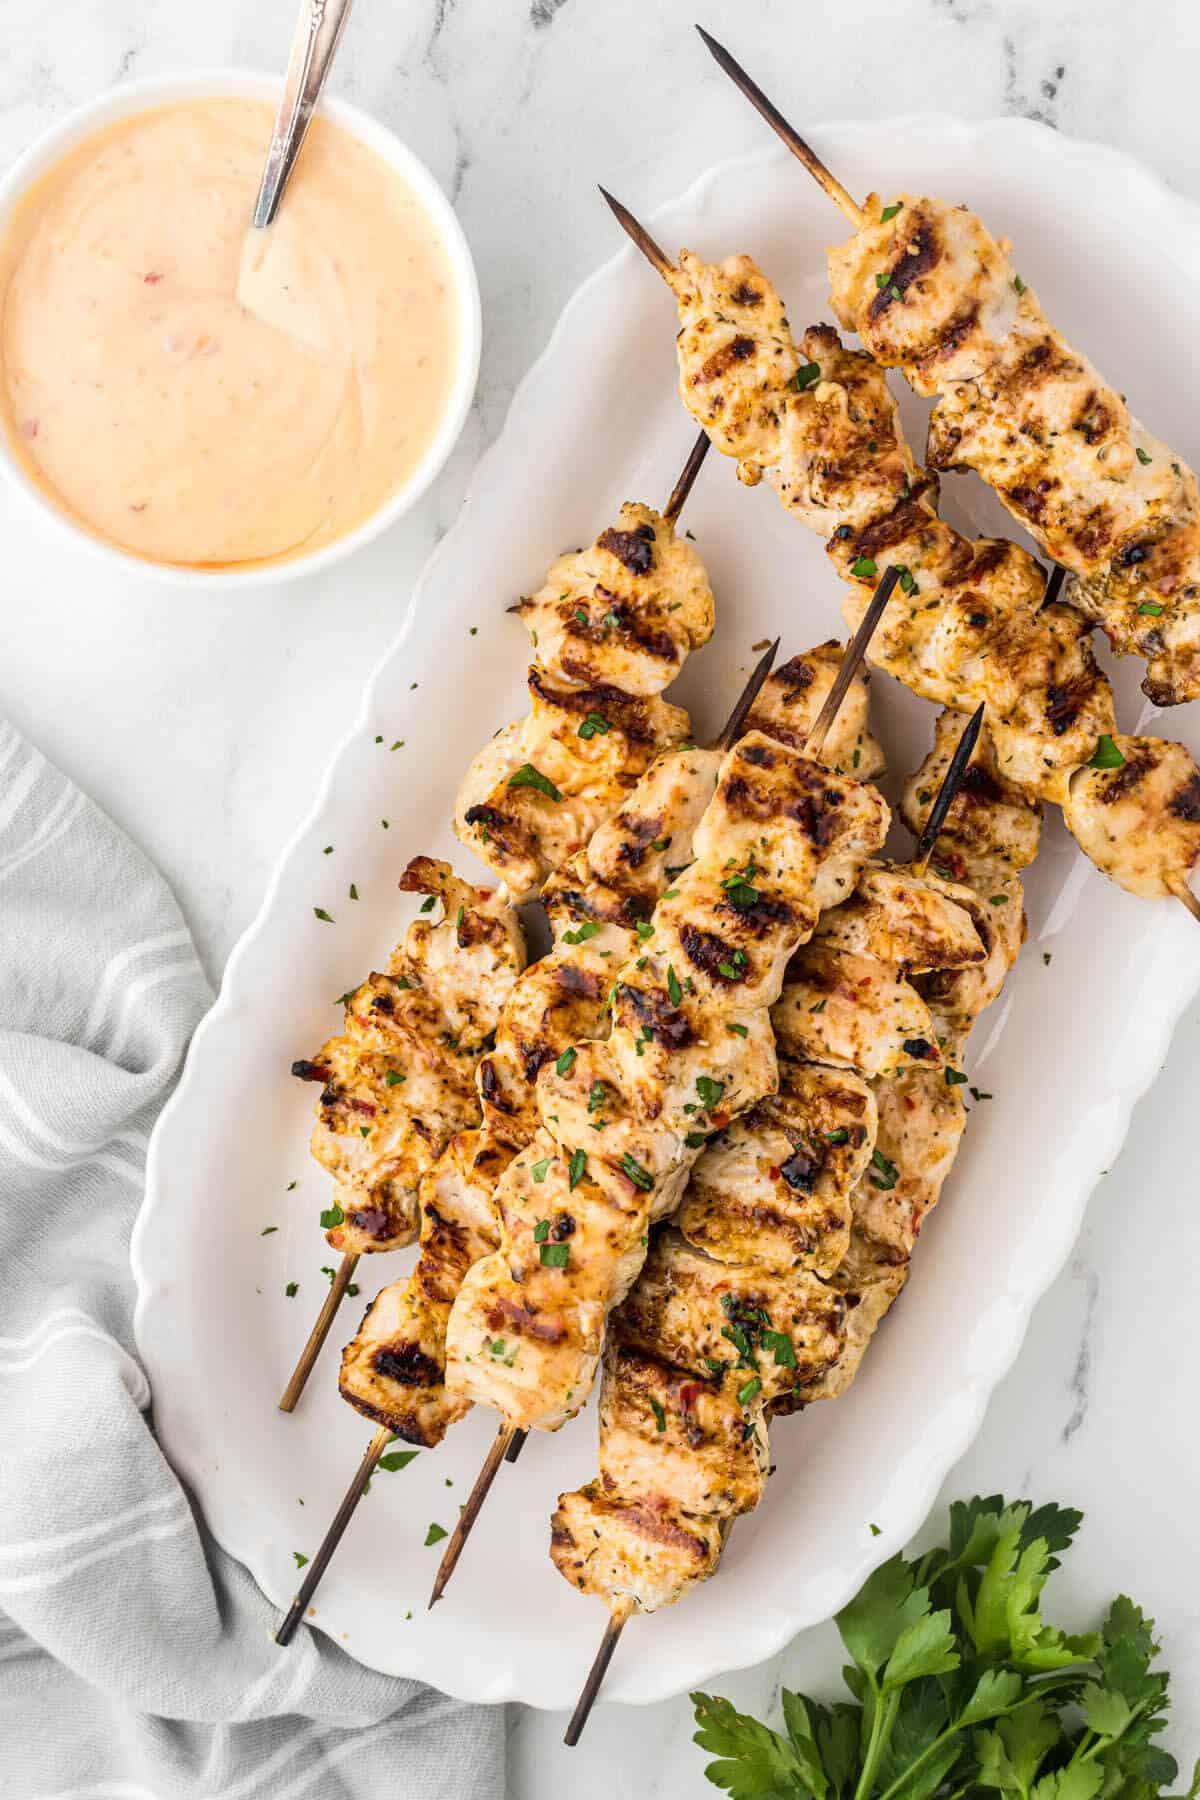 A platter of bang bang chicken skewers on a platter beside a bowl of dipping sauce.